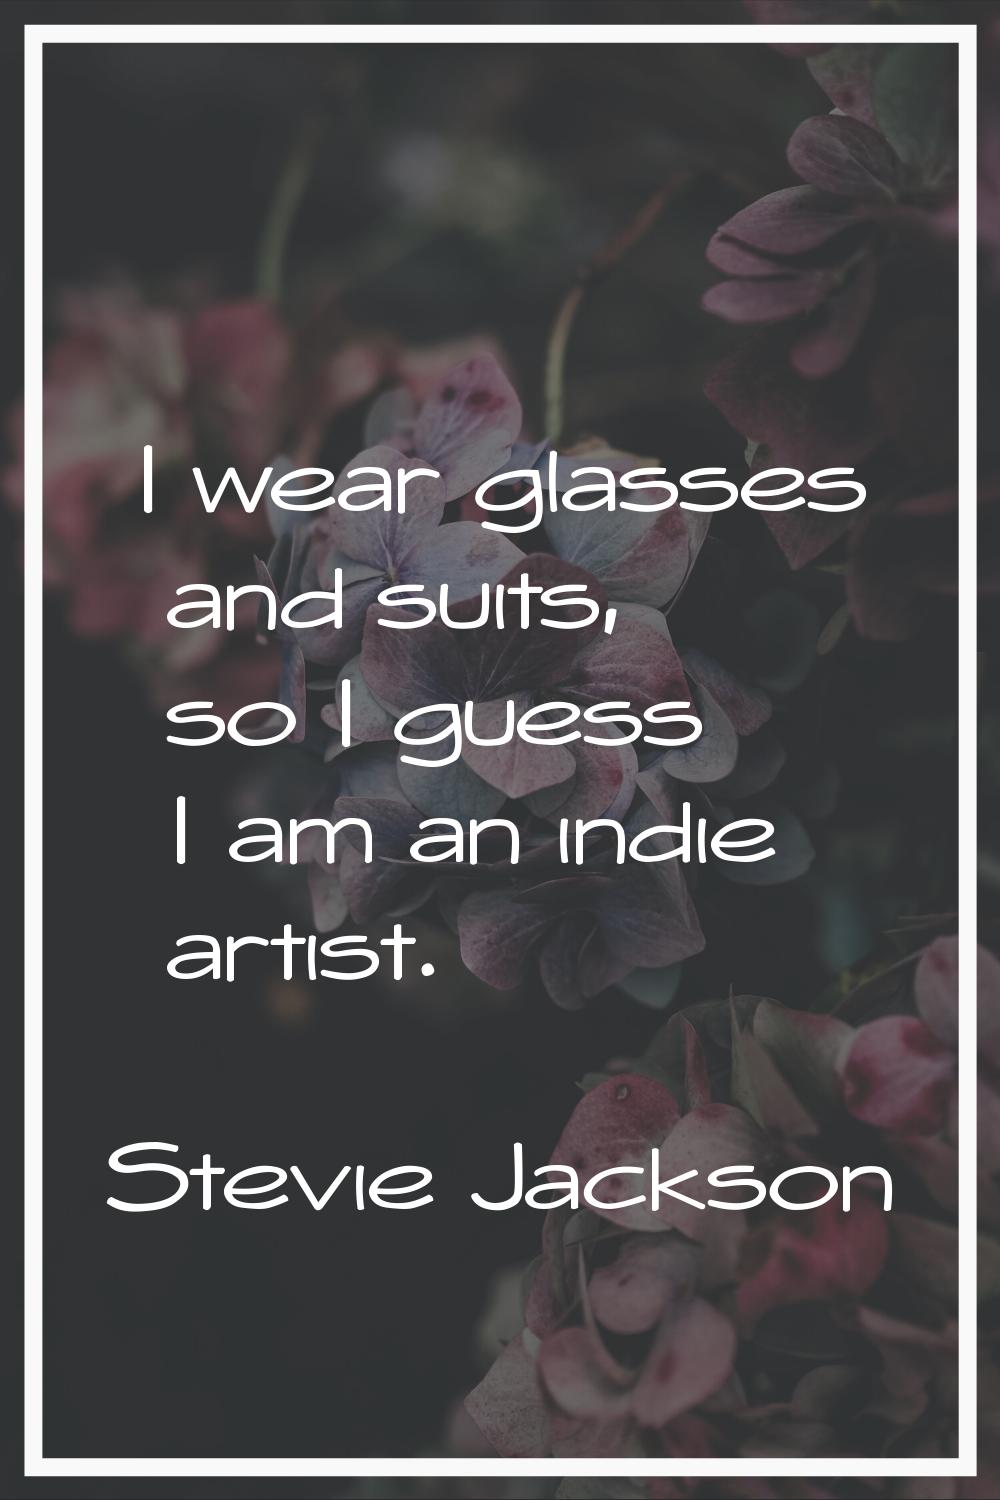 I wear glasses and suits, so I guess I am an indie artist.